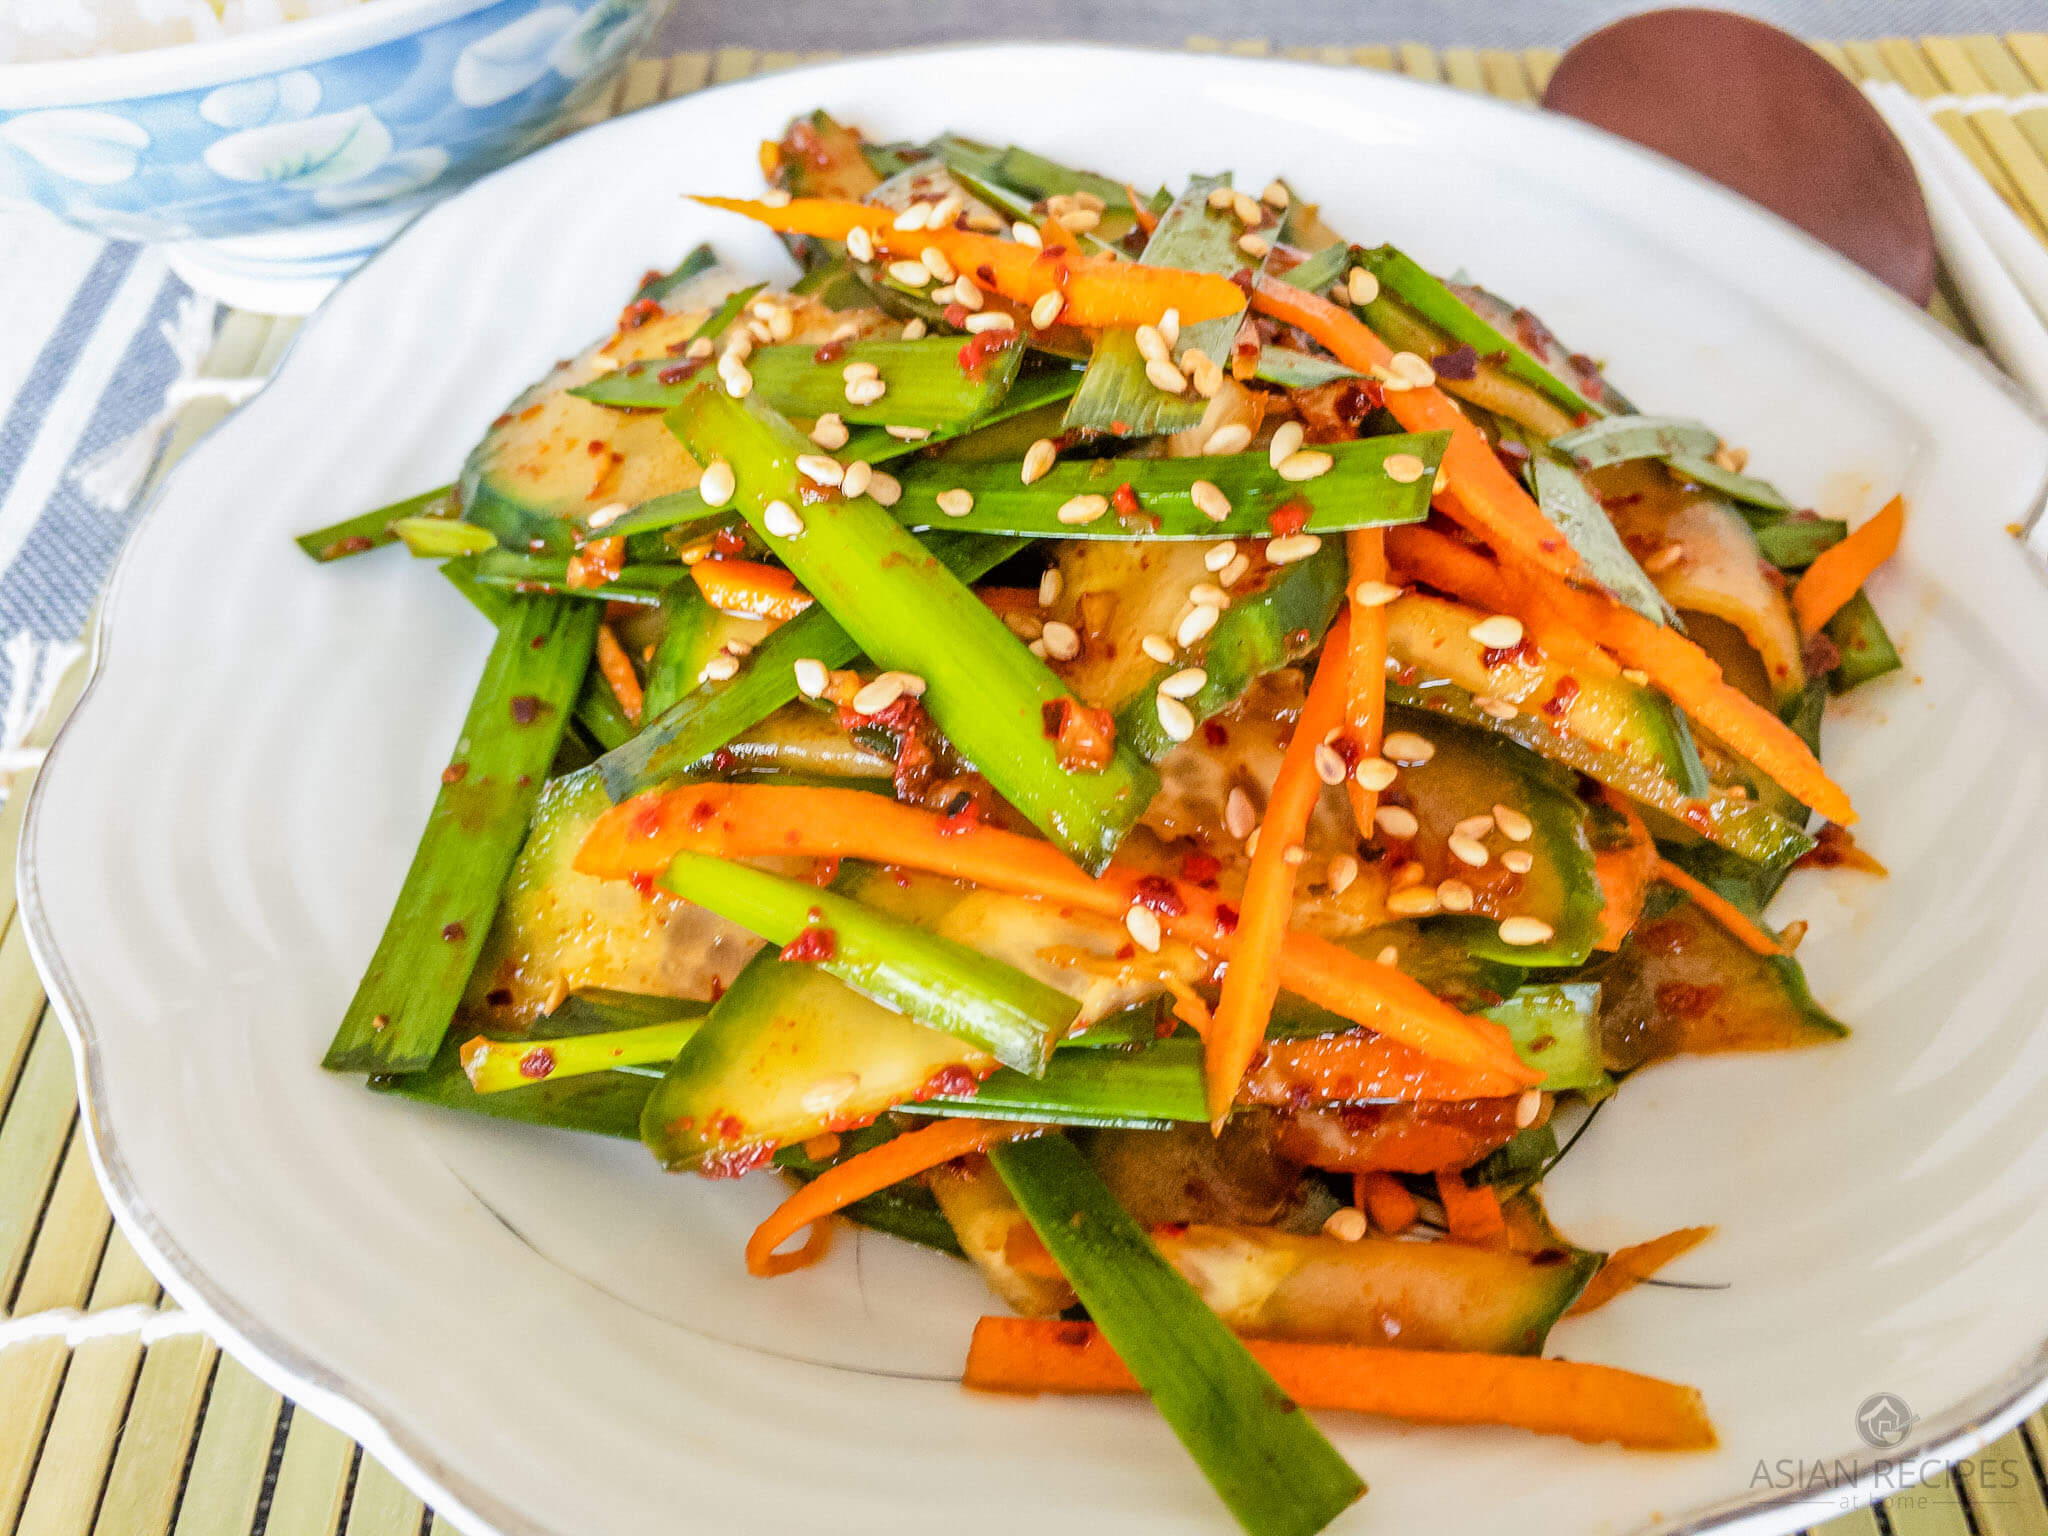 Make this fresh Korean-style cucumber and chive salad with our easy and tasty recipe. Cucumbers and garlic chives are tossed in a red hot chili pepper powder (gochugaru), soy sauce, fish sauce, garlic, and a few other common ingredients. 